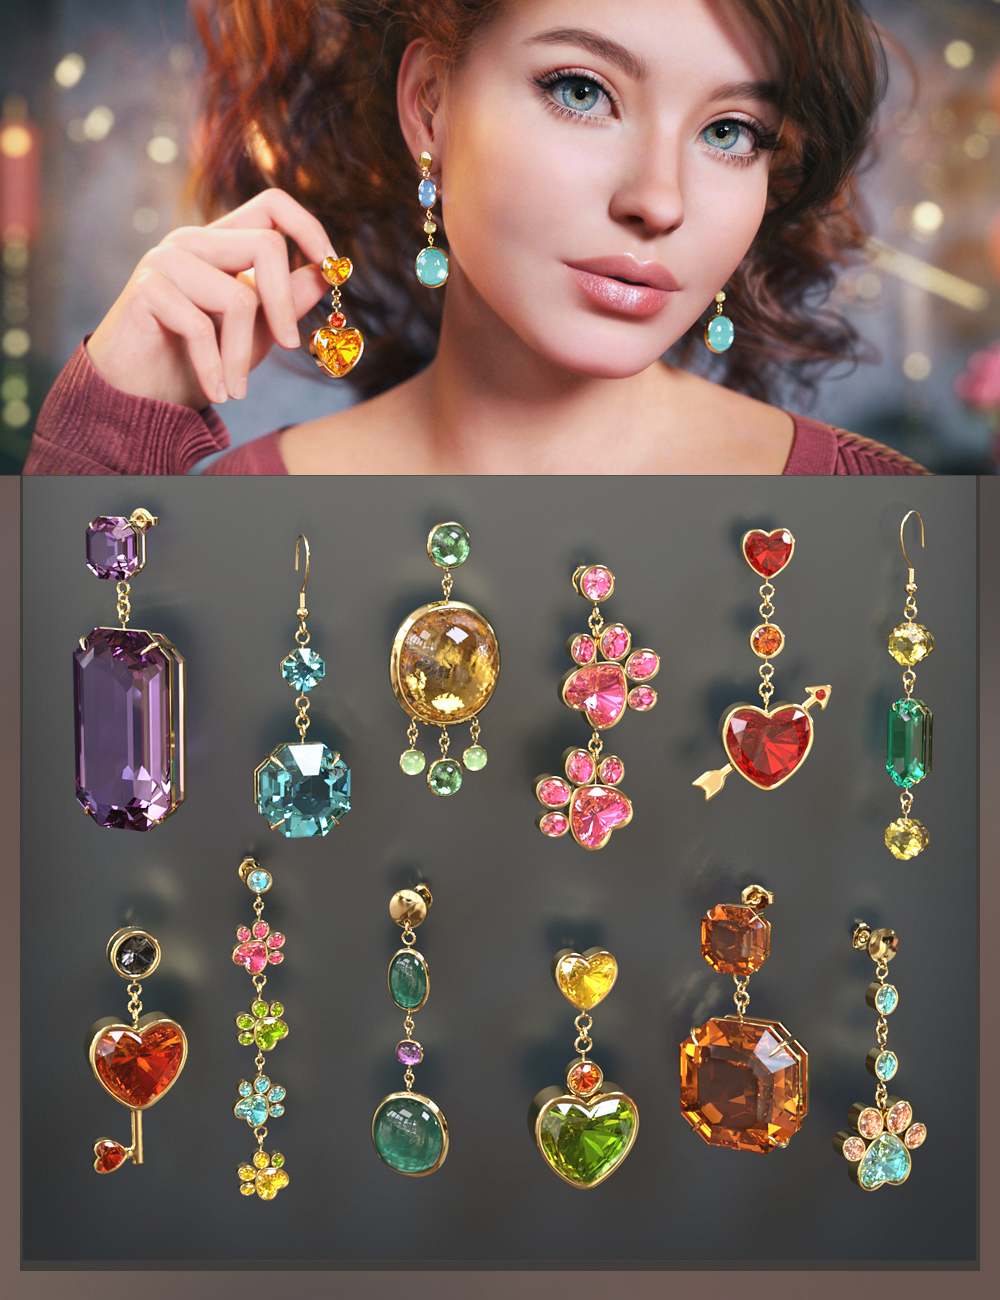 Aggregate 96+ earrings new models images